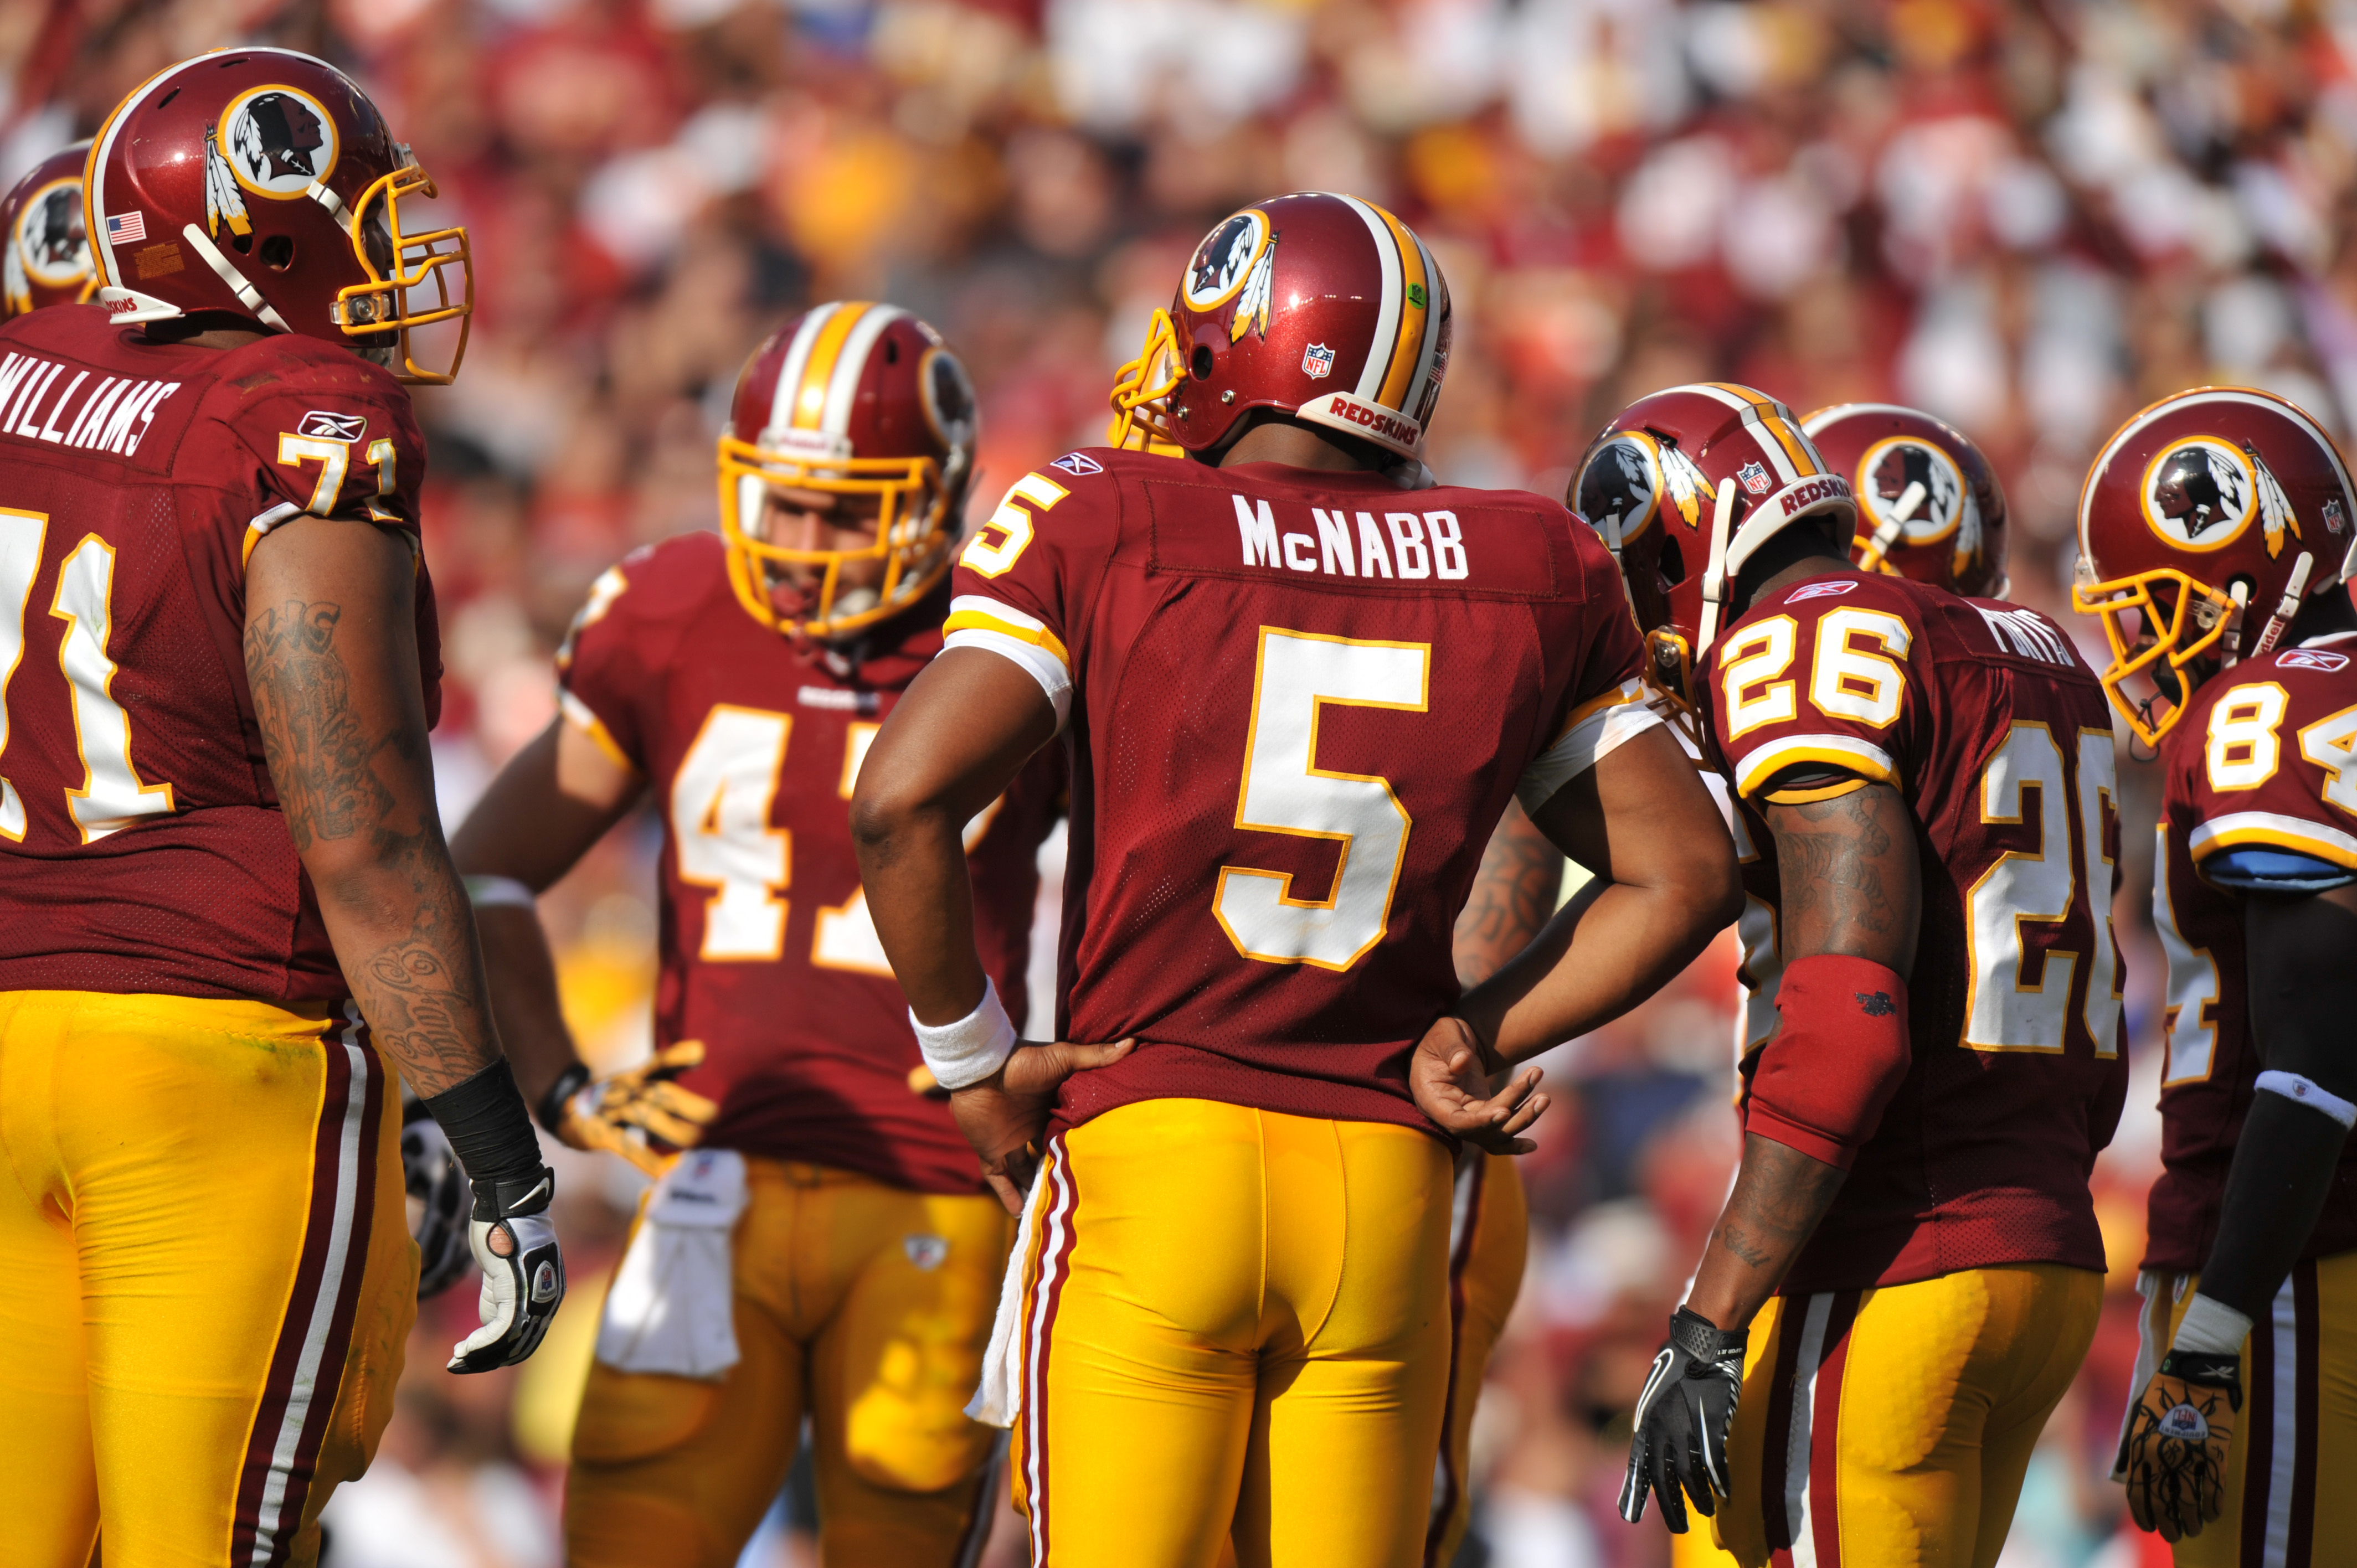 LANDOVER - SEPTEMBER 19:  Donovan McNabb #5 of the Washington Redskins leads the huddle during the game against the Houston Texans at FedExField on September 19, 2010 in Landover, Maryland. The Texans defeated the Redskins in overtime 30-27. (Photo by Lar